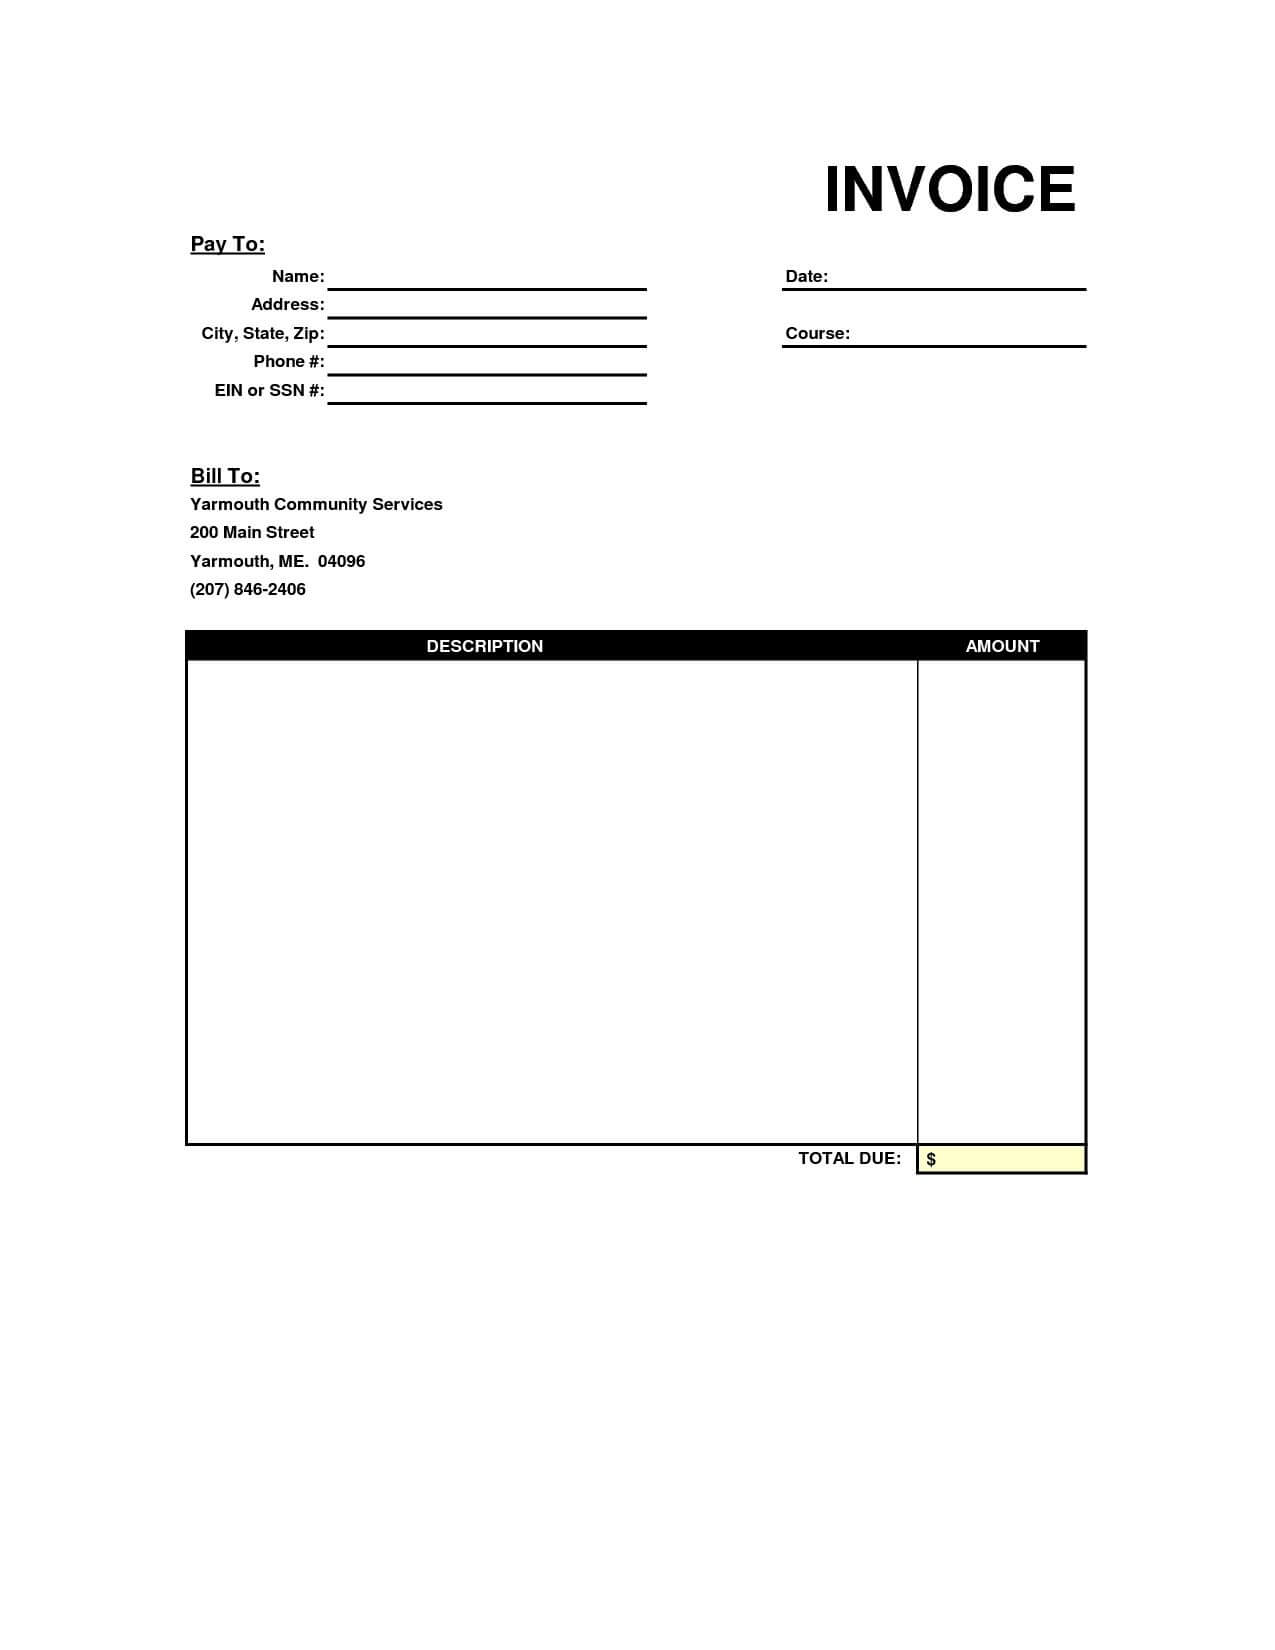 10 Images About Invoice On Pinterest Shops Words And For Within Web Design Invoice Template Word